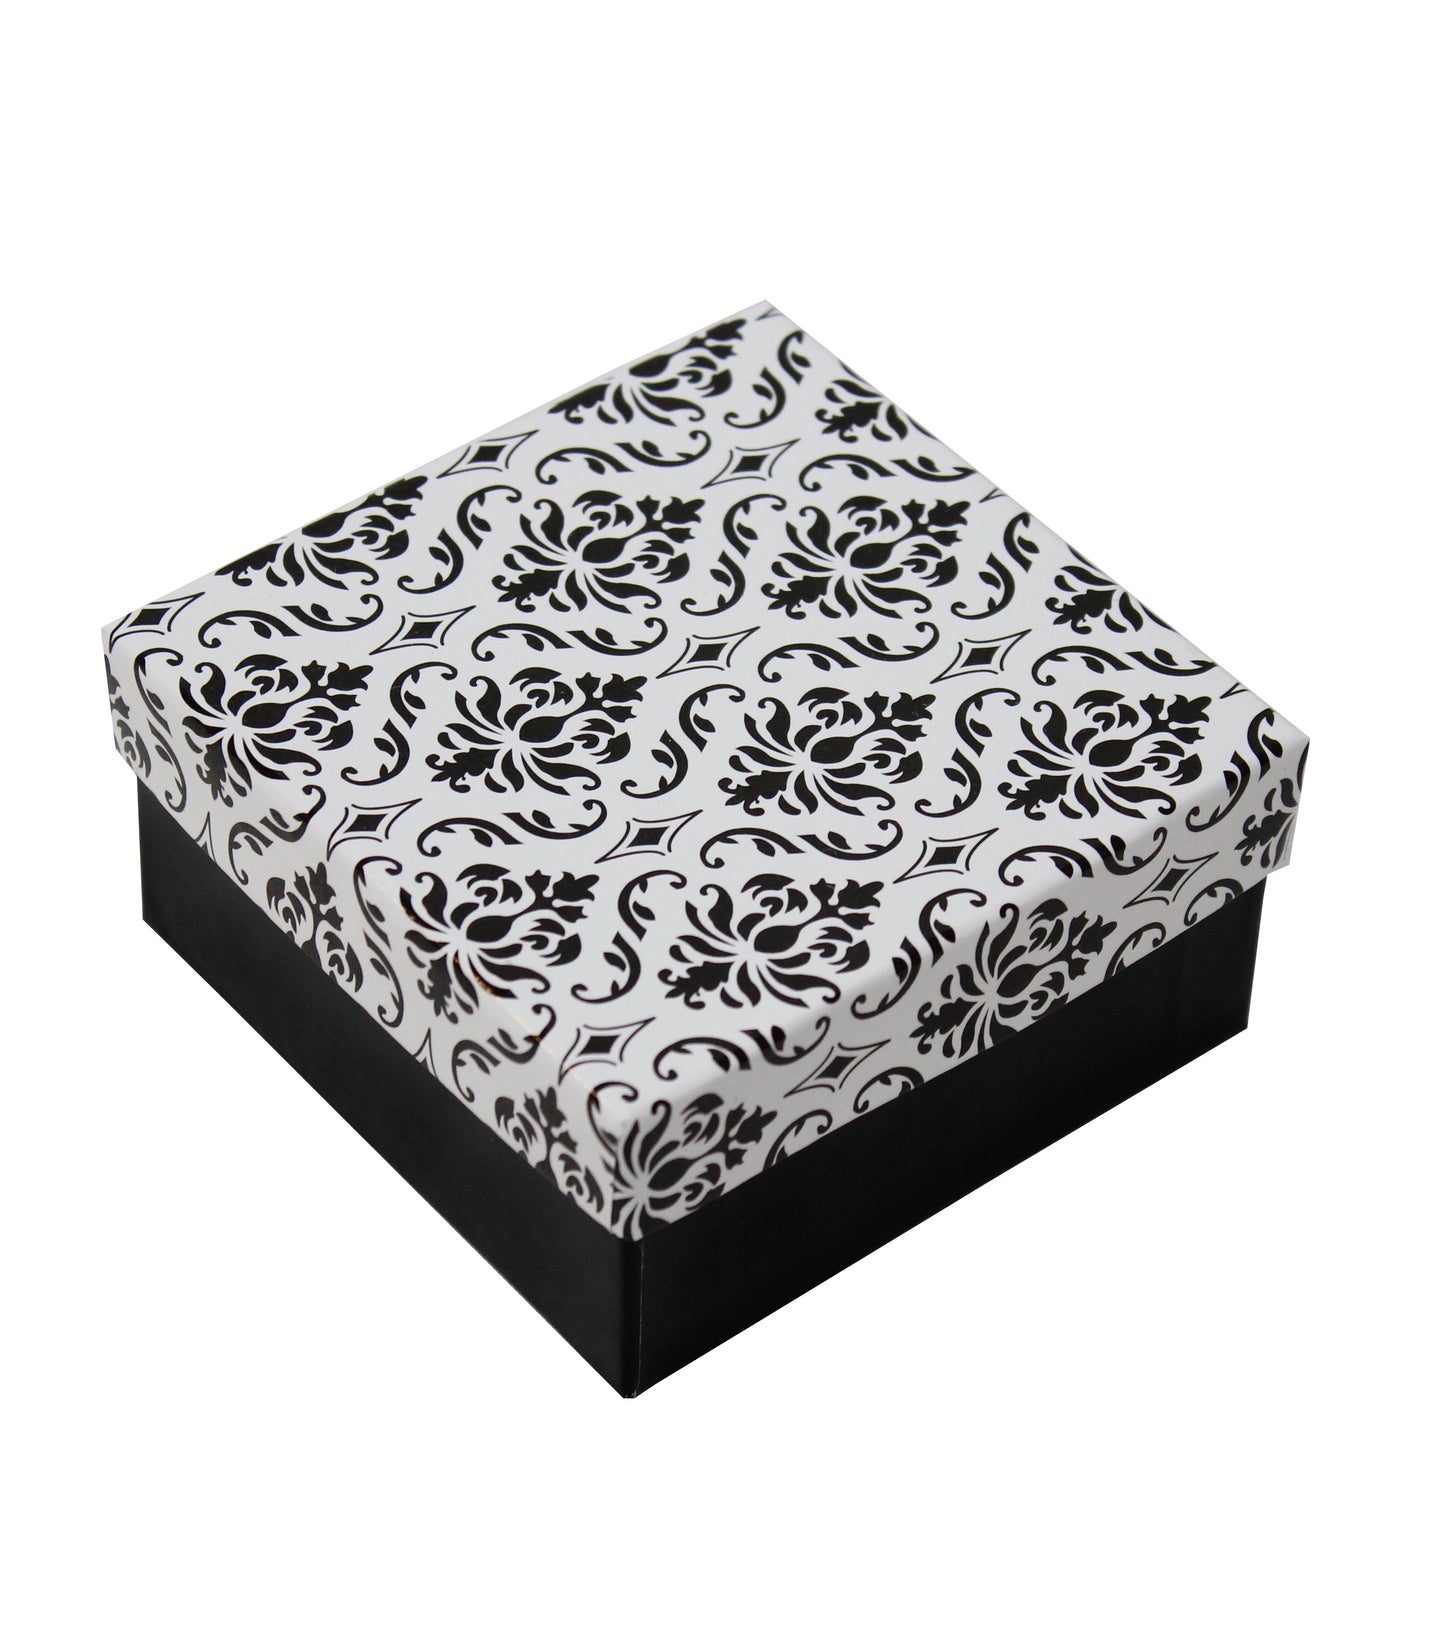 Damask Print Cotton Filled Gift Boxes Jewelry